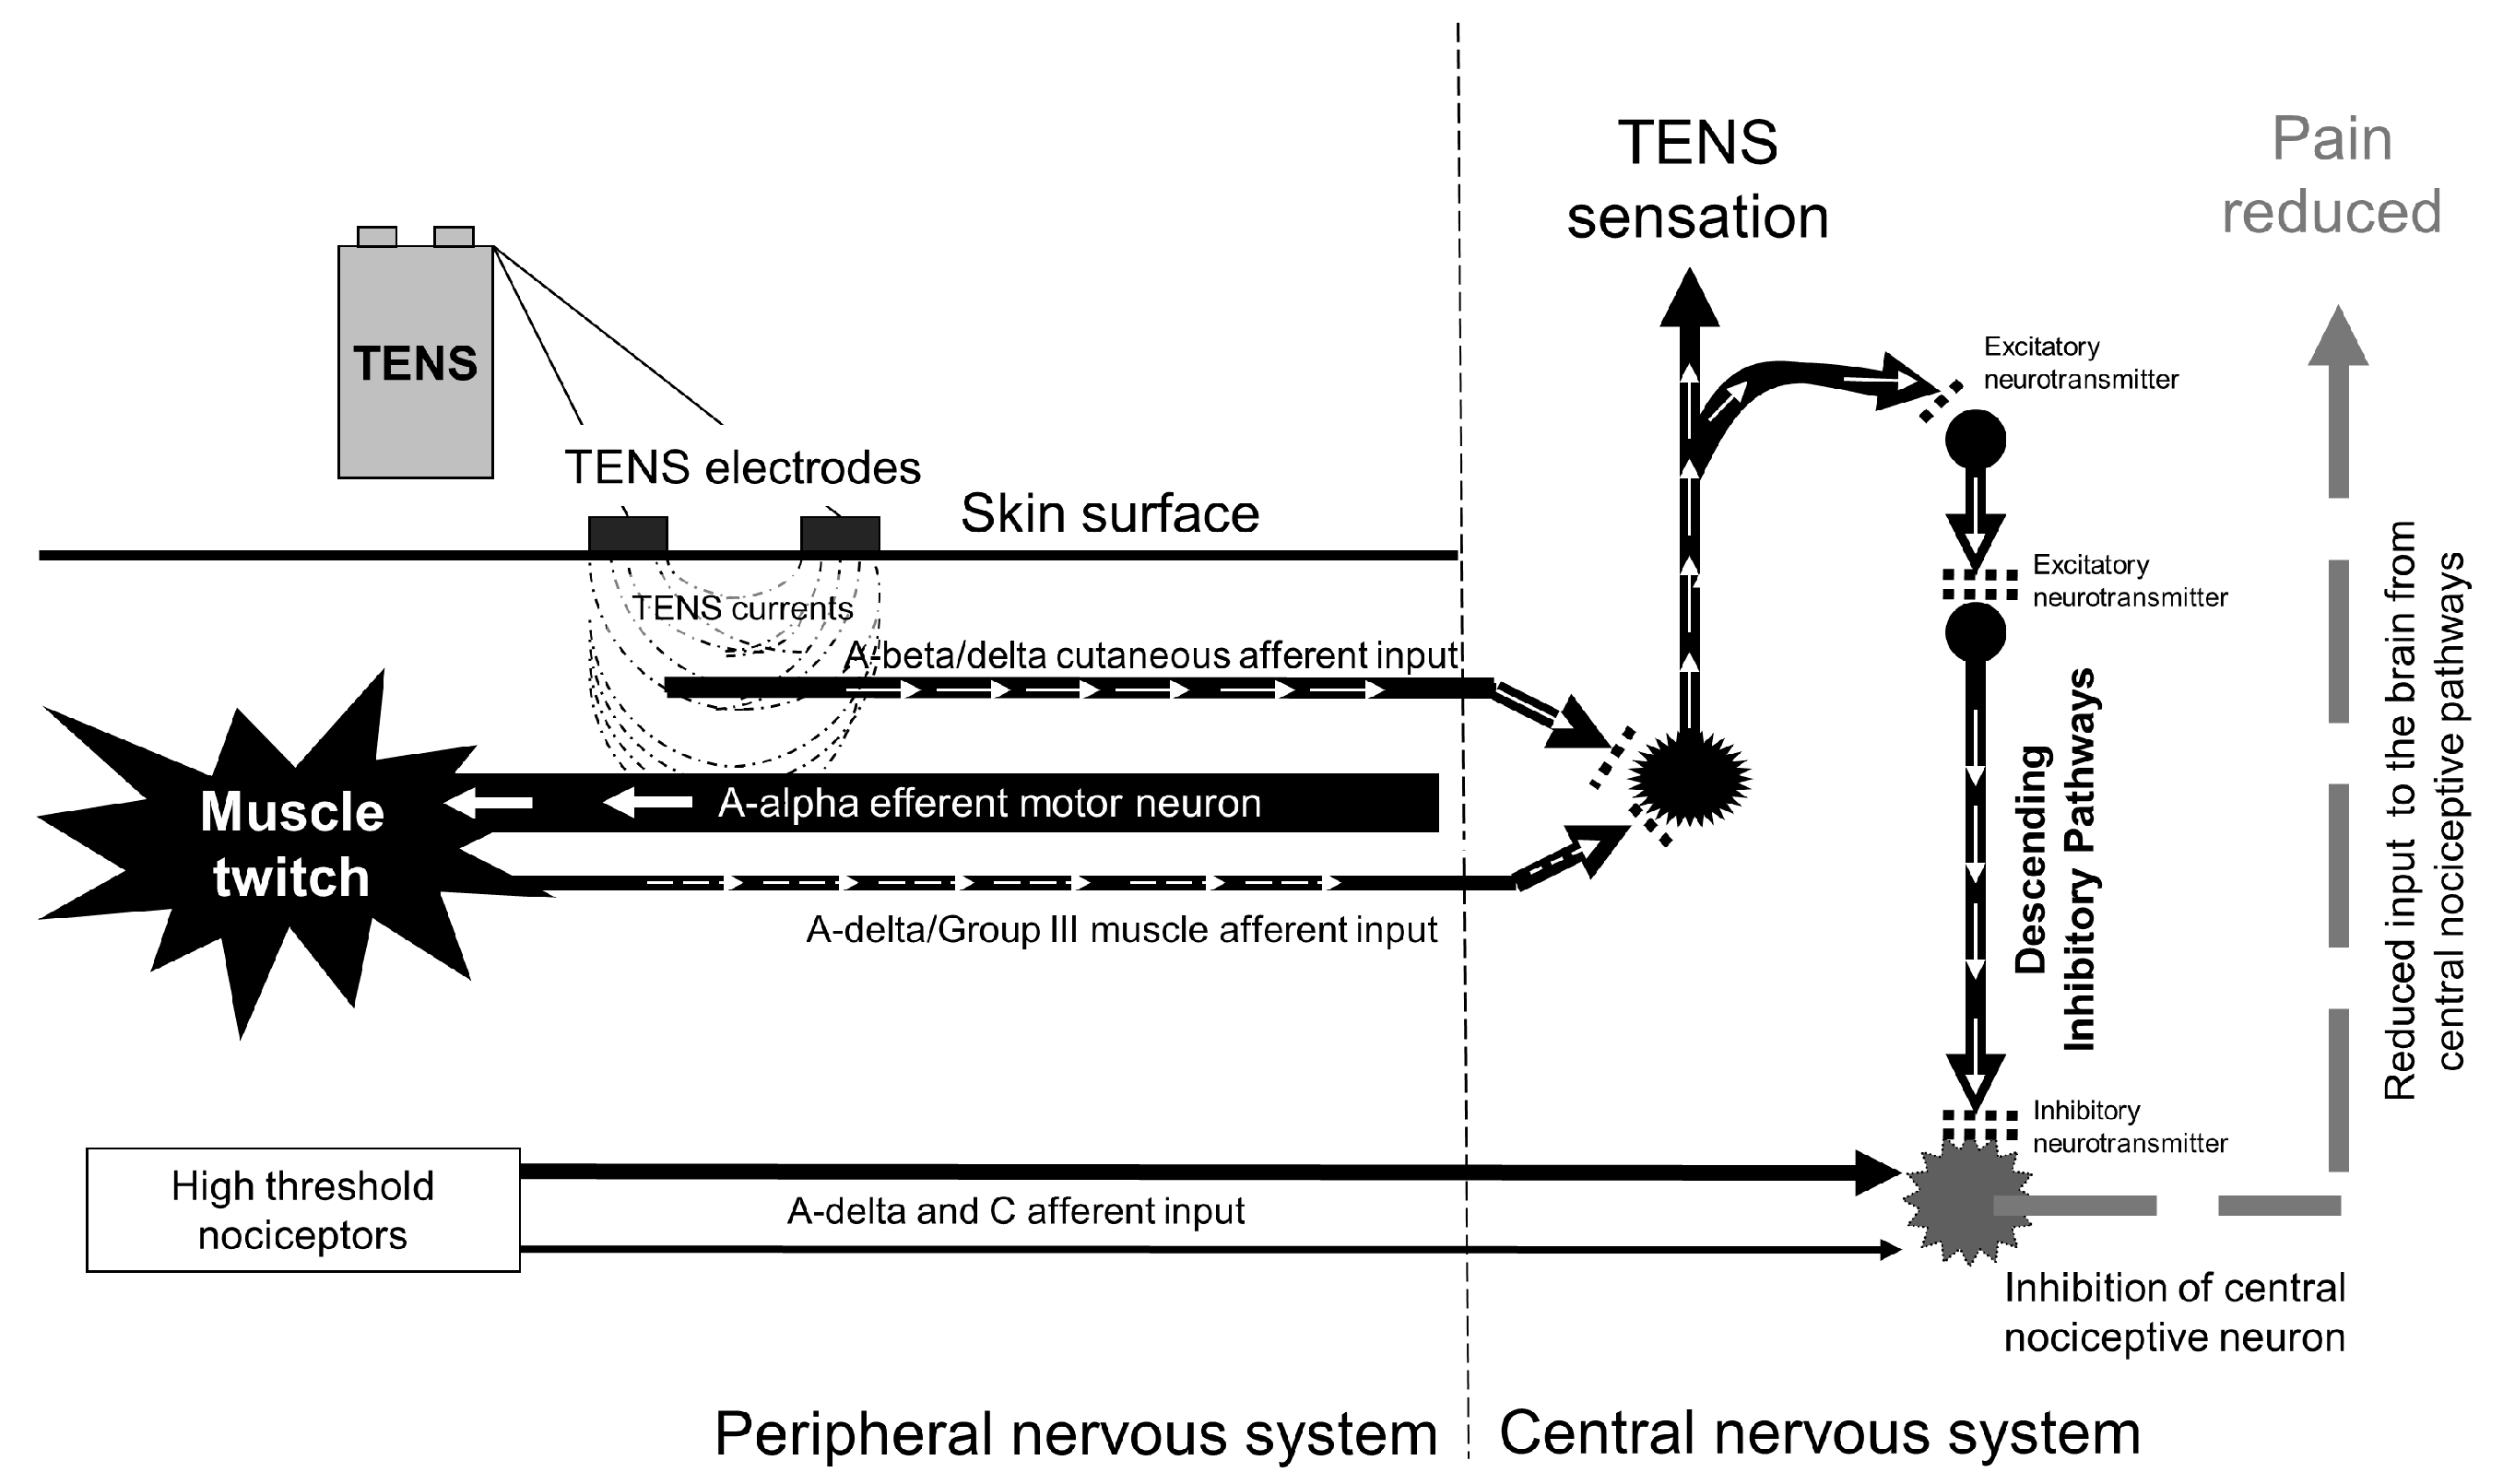 TENS (transcutaneous electrical nerve stimulation) - NHS